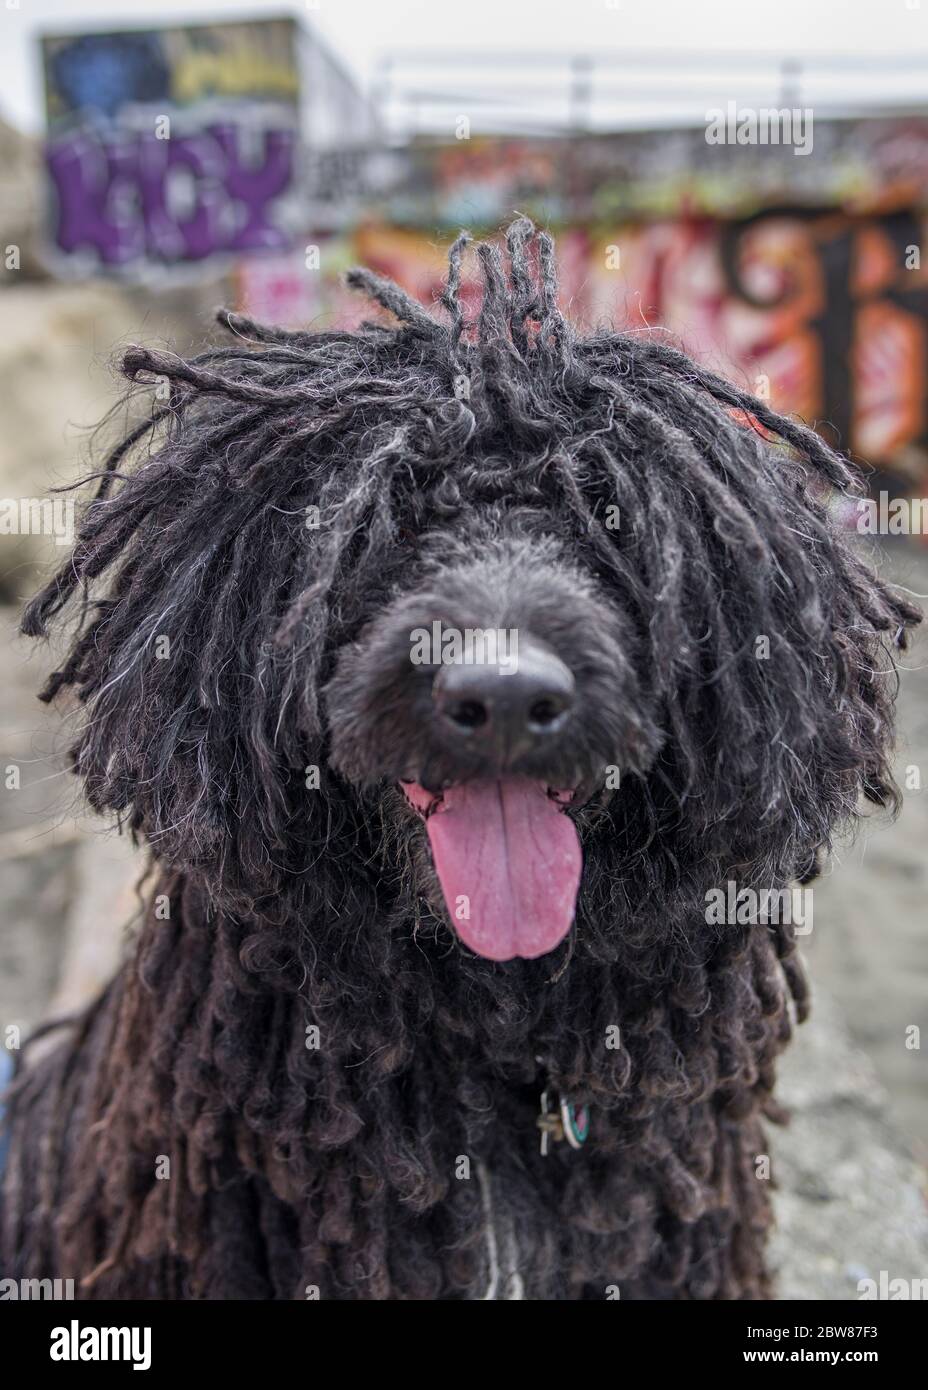 Hungarian Puli (Pulik) with Show Quality Cords Portrait Stock Photo